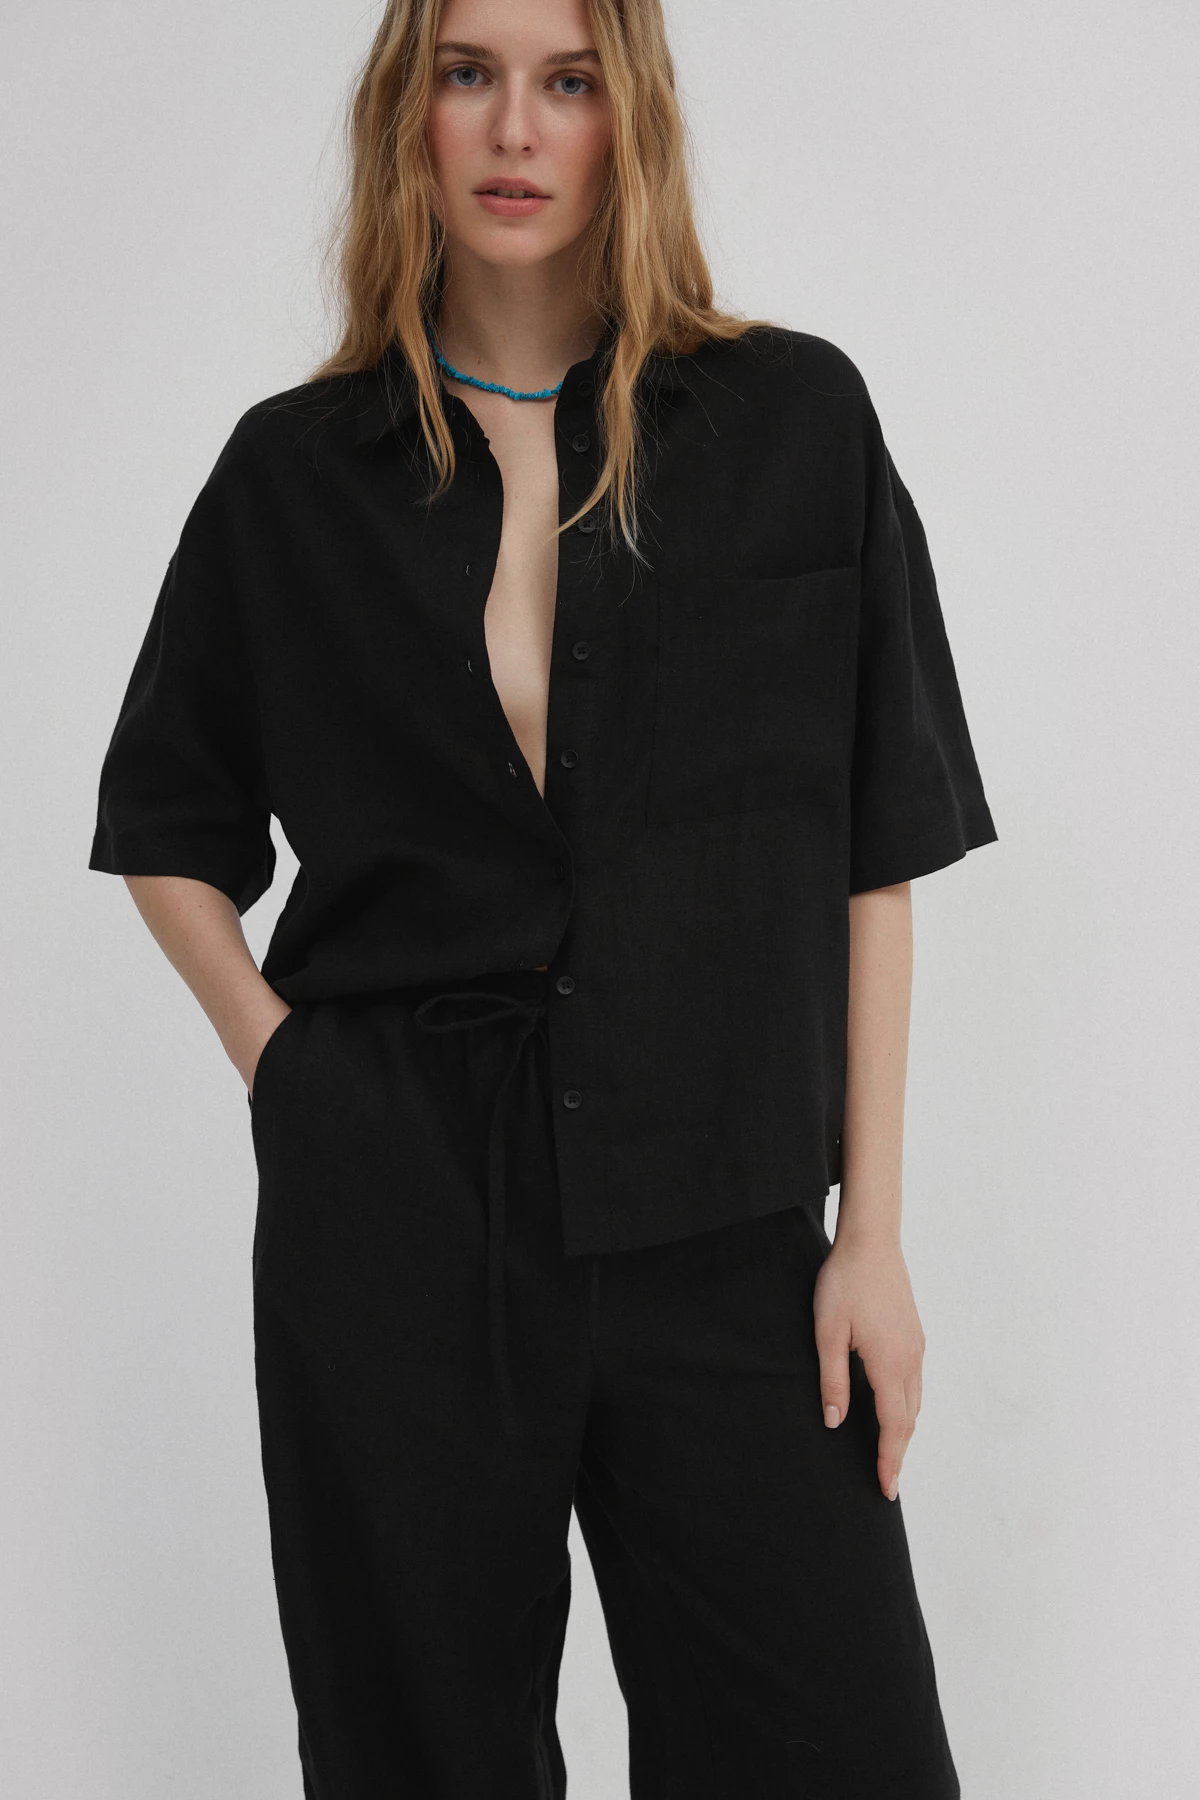 Black shirt with short sleeves made of linen, photo 1